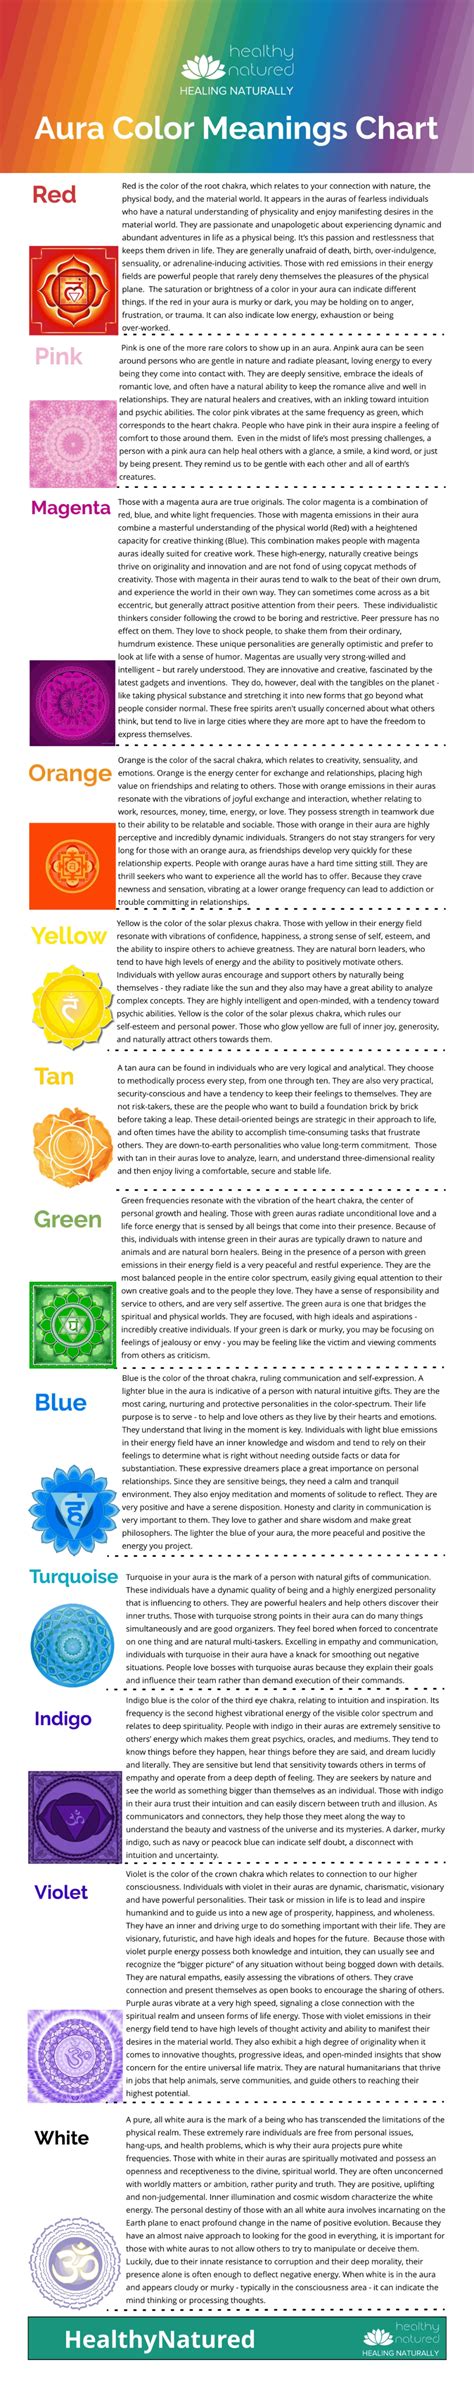 Aura Colors Chart Discover Your Aura Color Meanings In 5 Zones 8 In 2020 Aura Colors Aura